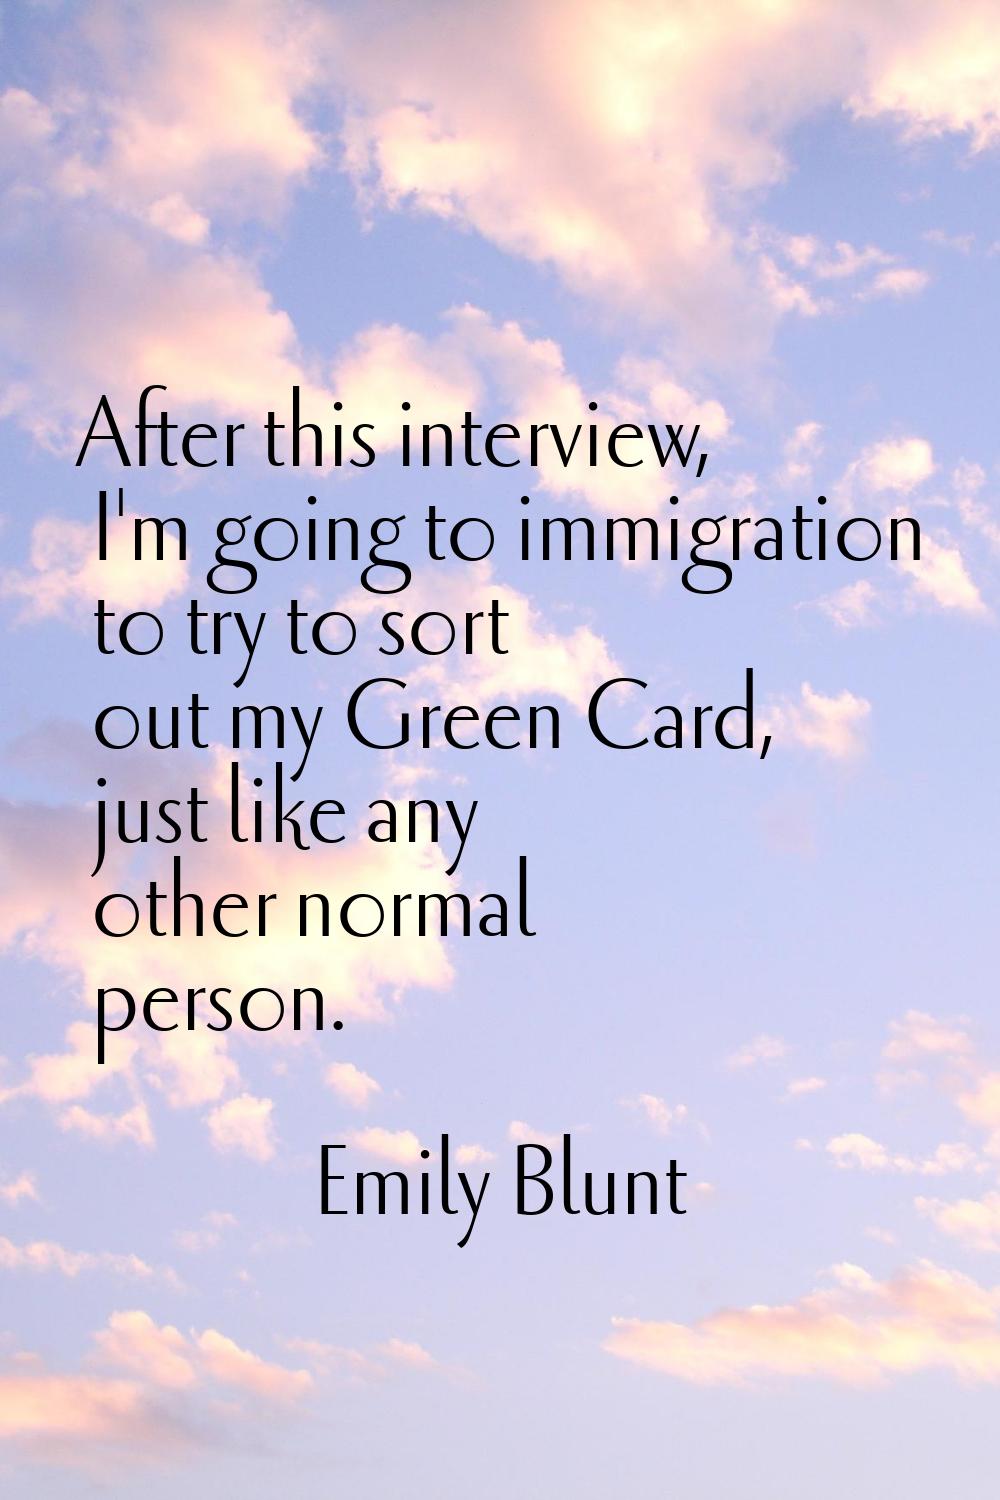 After this interview, I'm going to immigration to try to sort out my Green Card, just like any othe